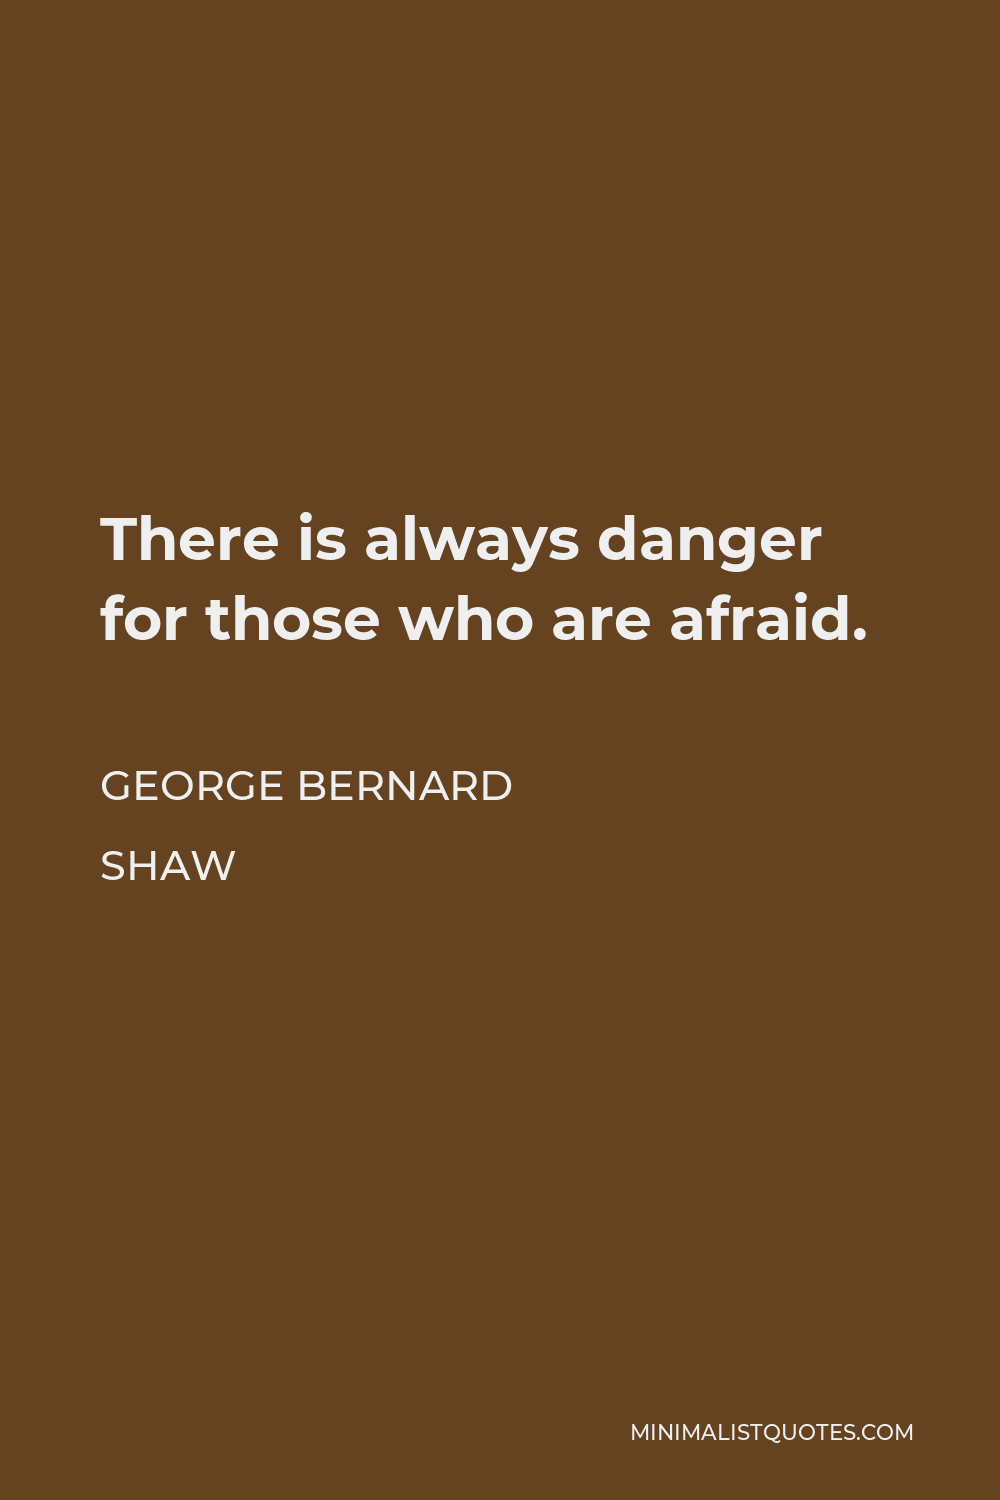 George Bernard Shaw Quote - There is always danger for those who are afraid.